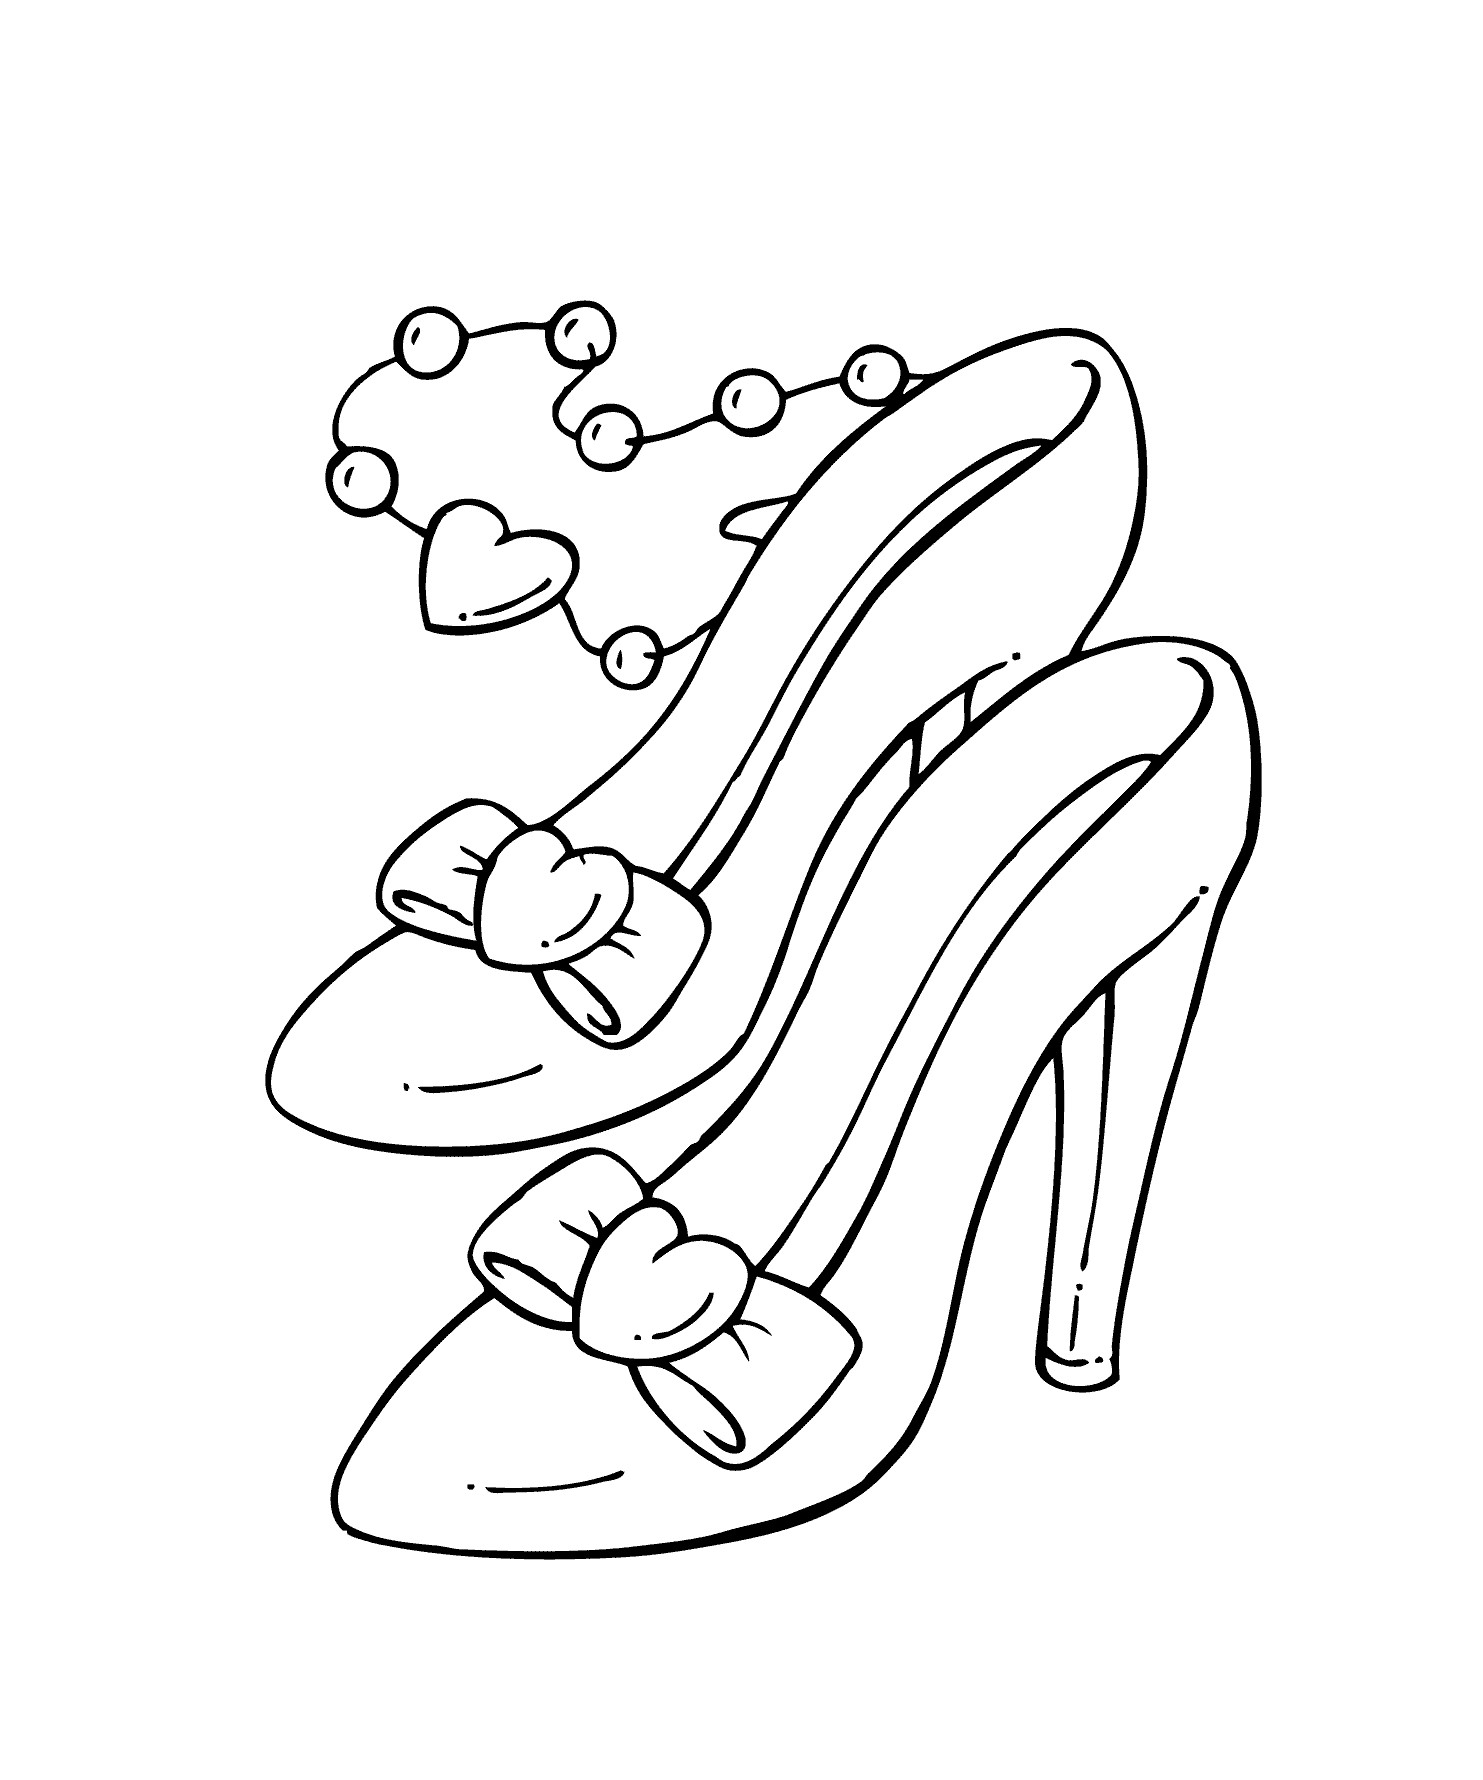 High Heel Shoes Coloring Page Coloring Pages